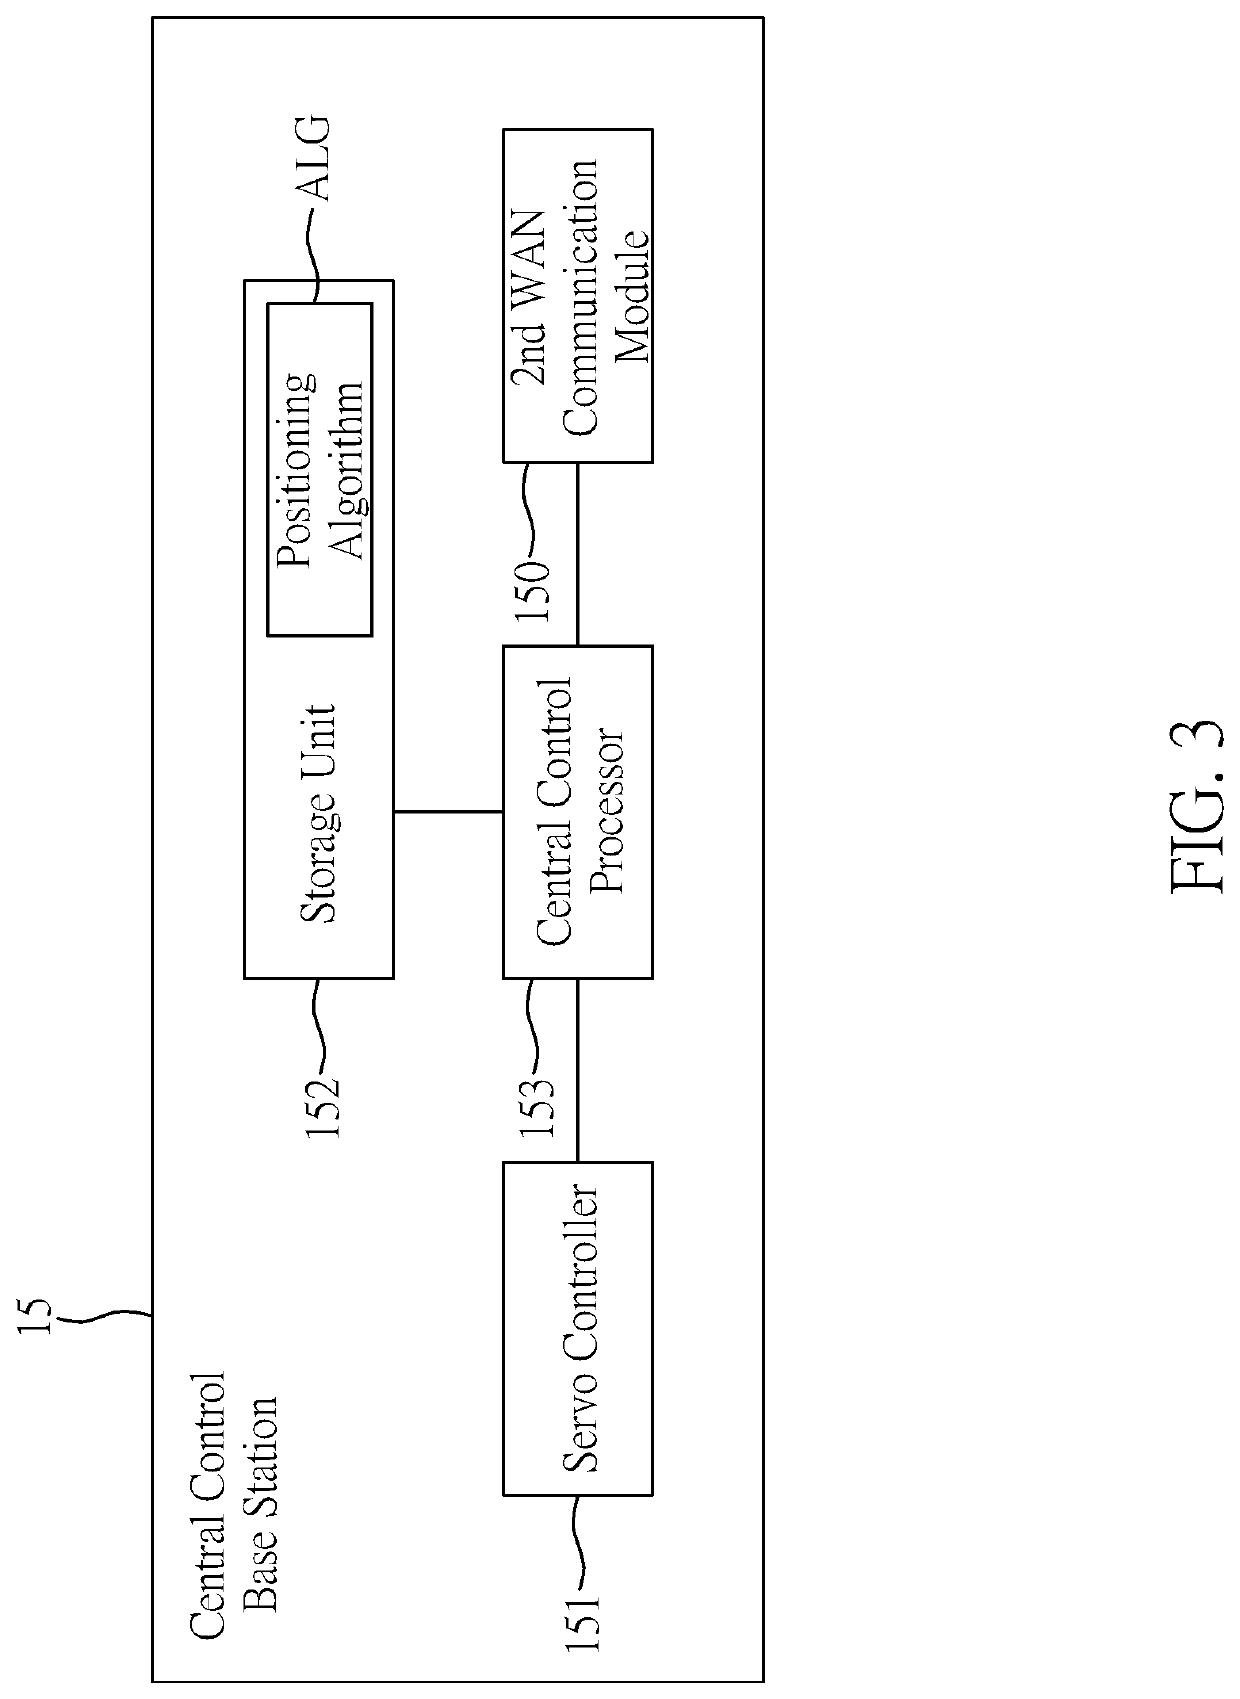 Ultra-wideband assisted precise positioning system and method